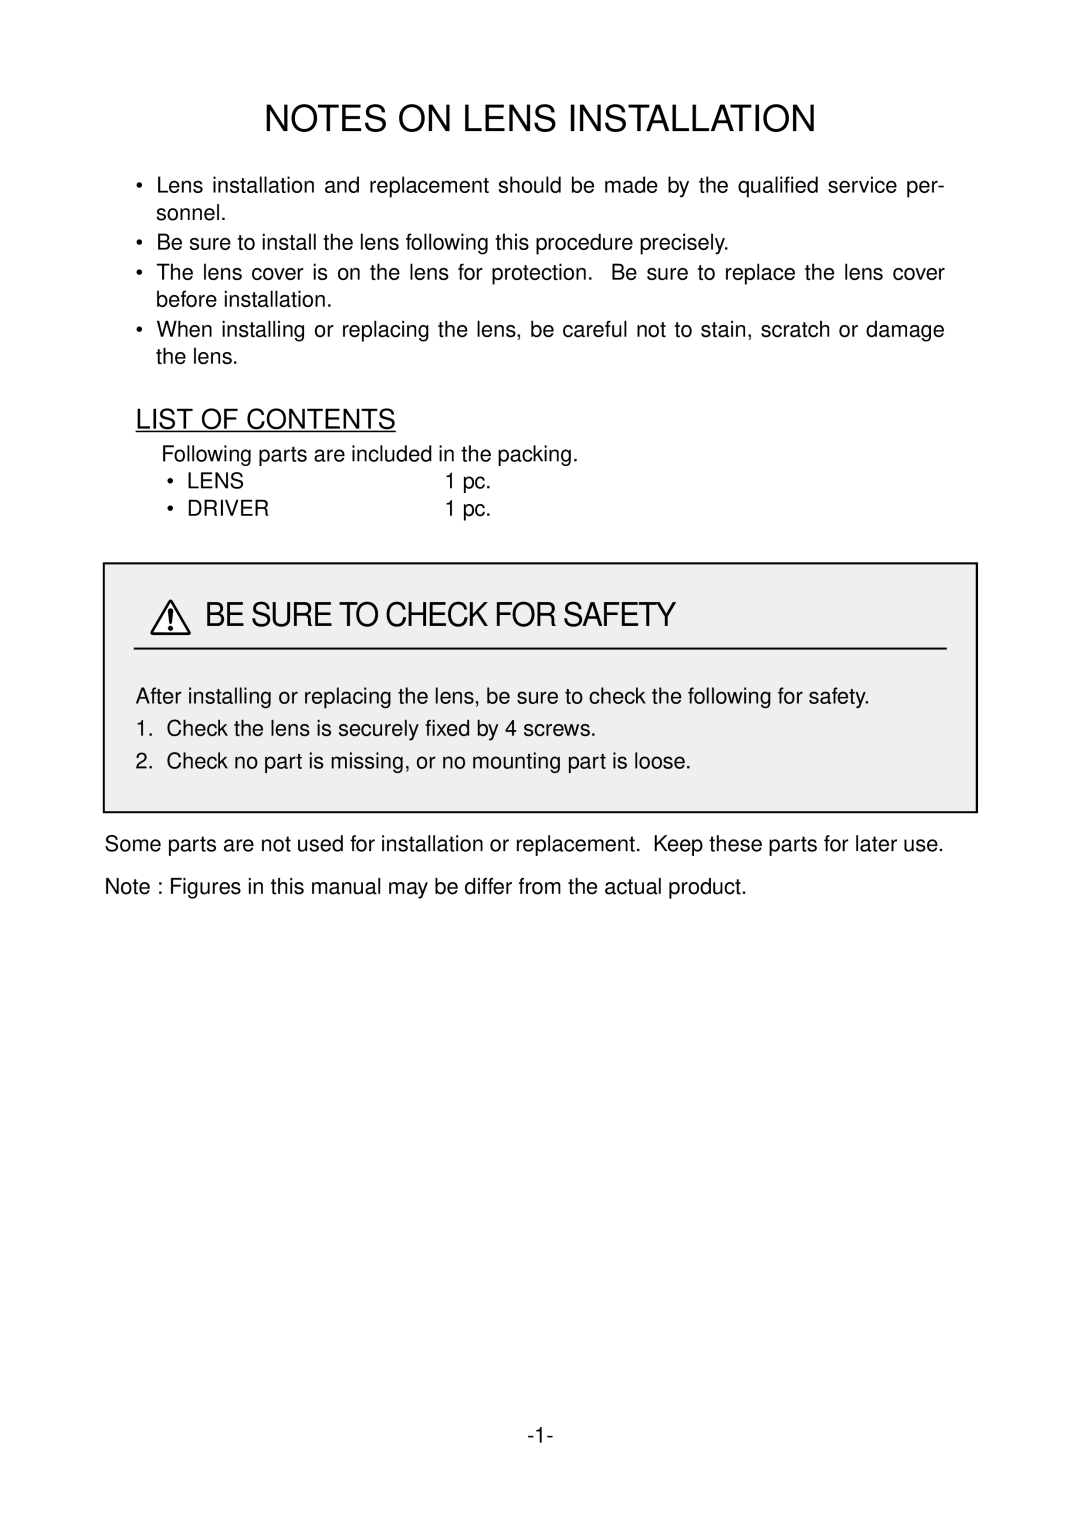 Sanyo LNS-S03 manual Notes On Lens Installation, Be Sure To Check For Safety, List Of Contents 